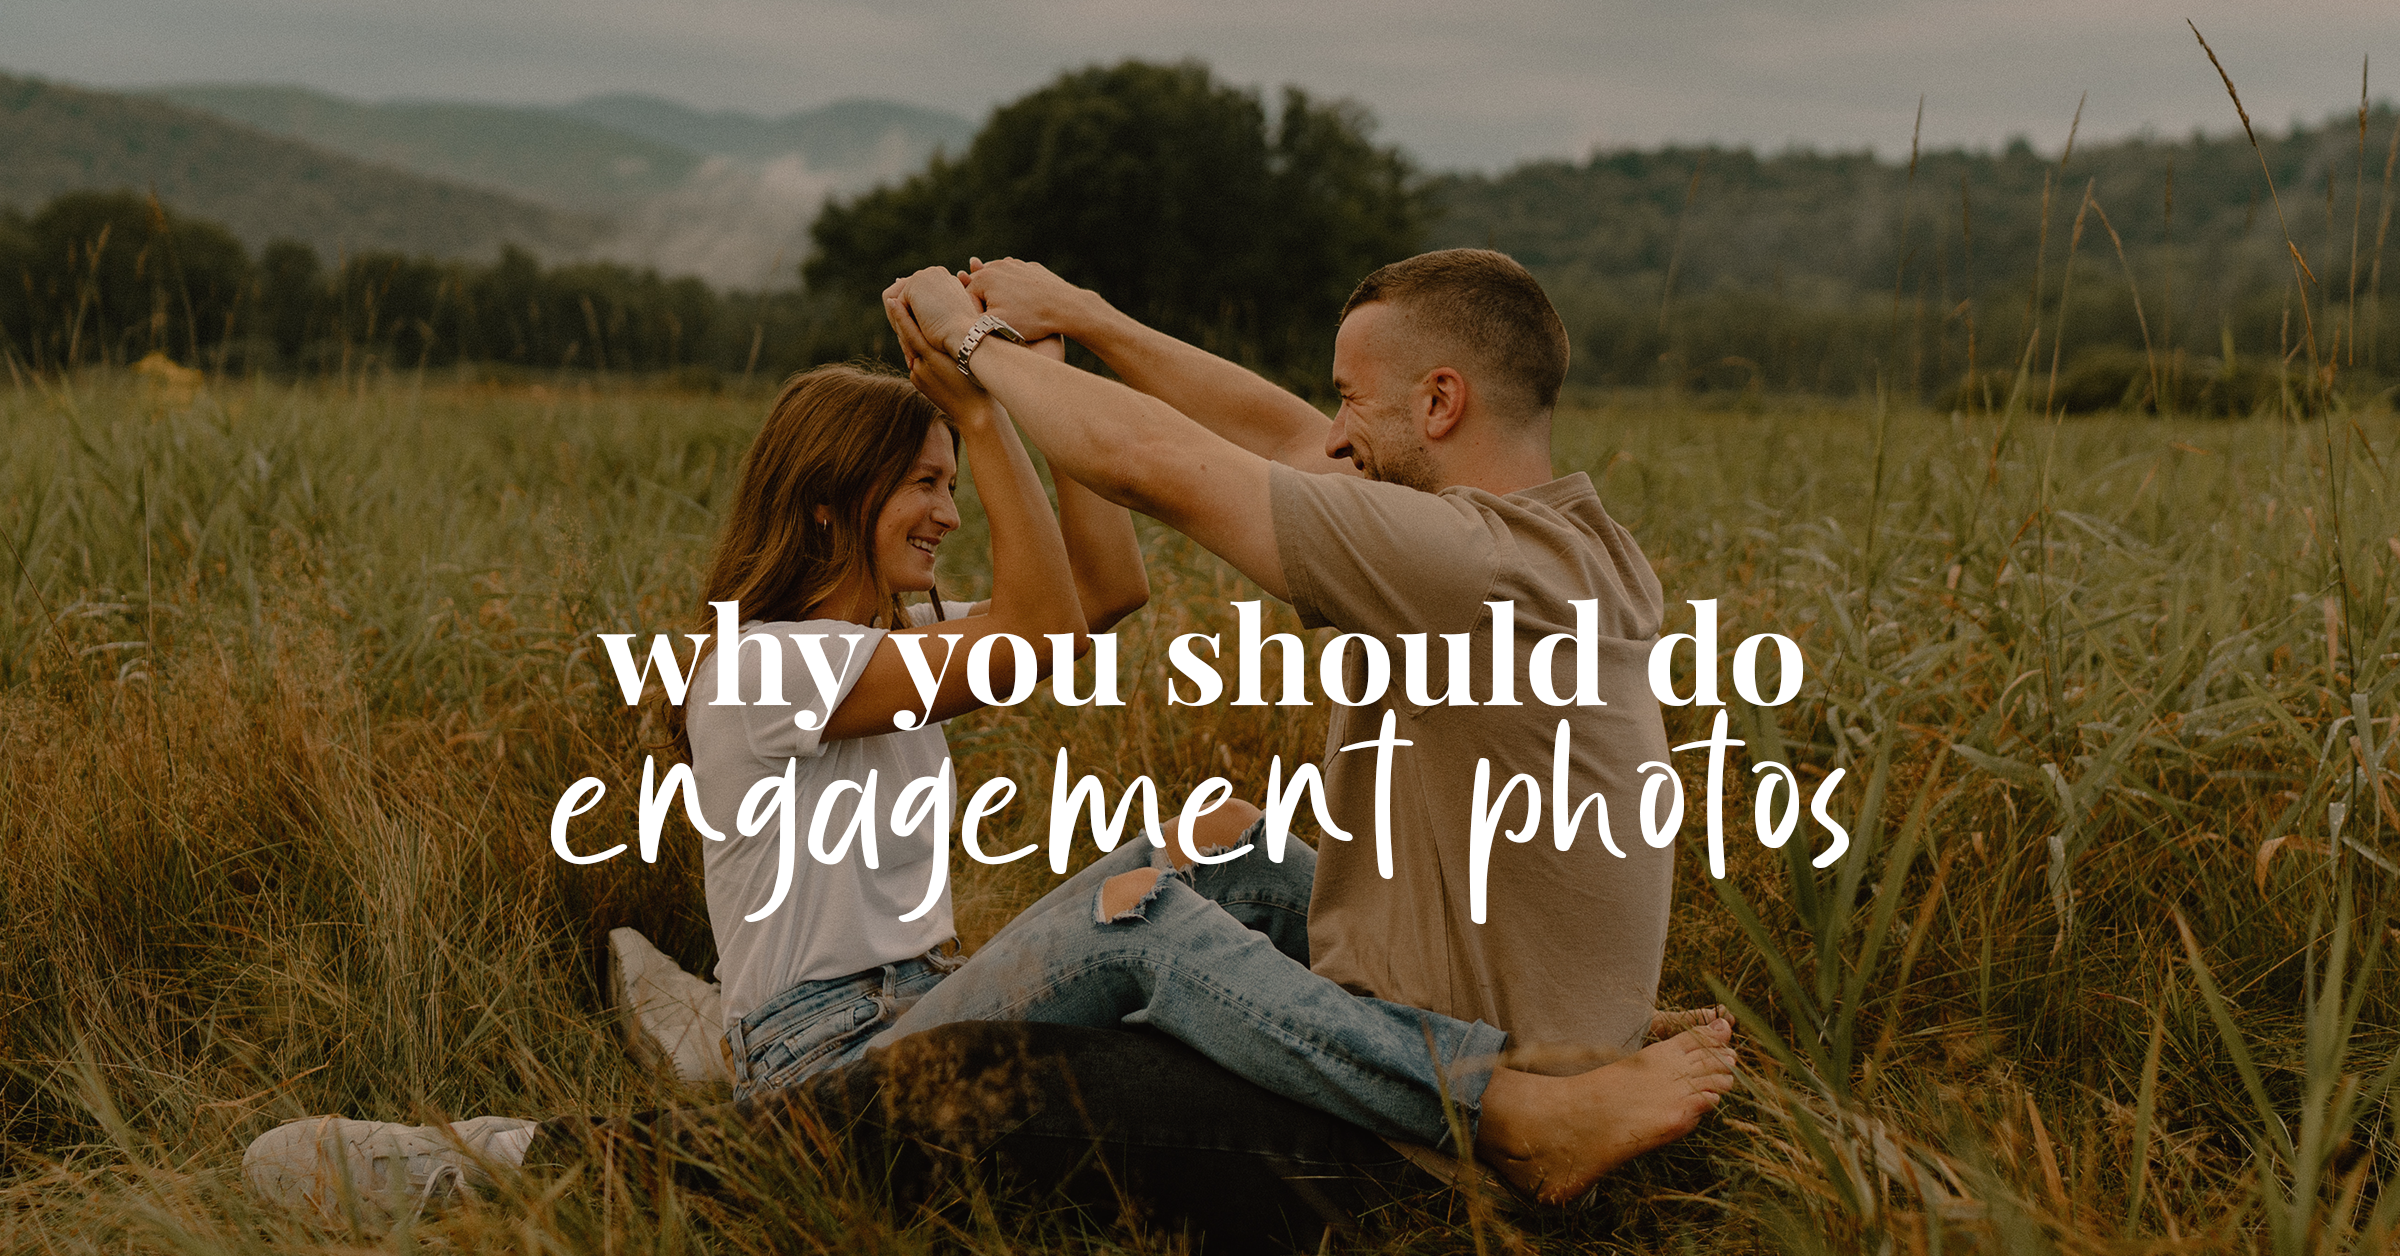 Why do engagement photos?